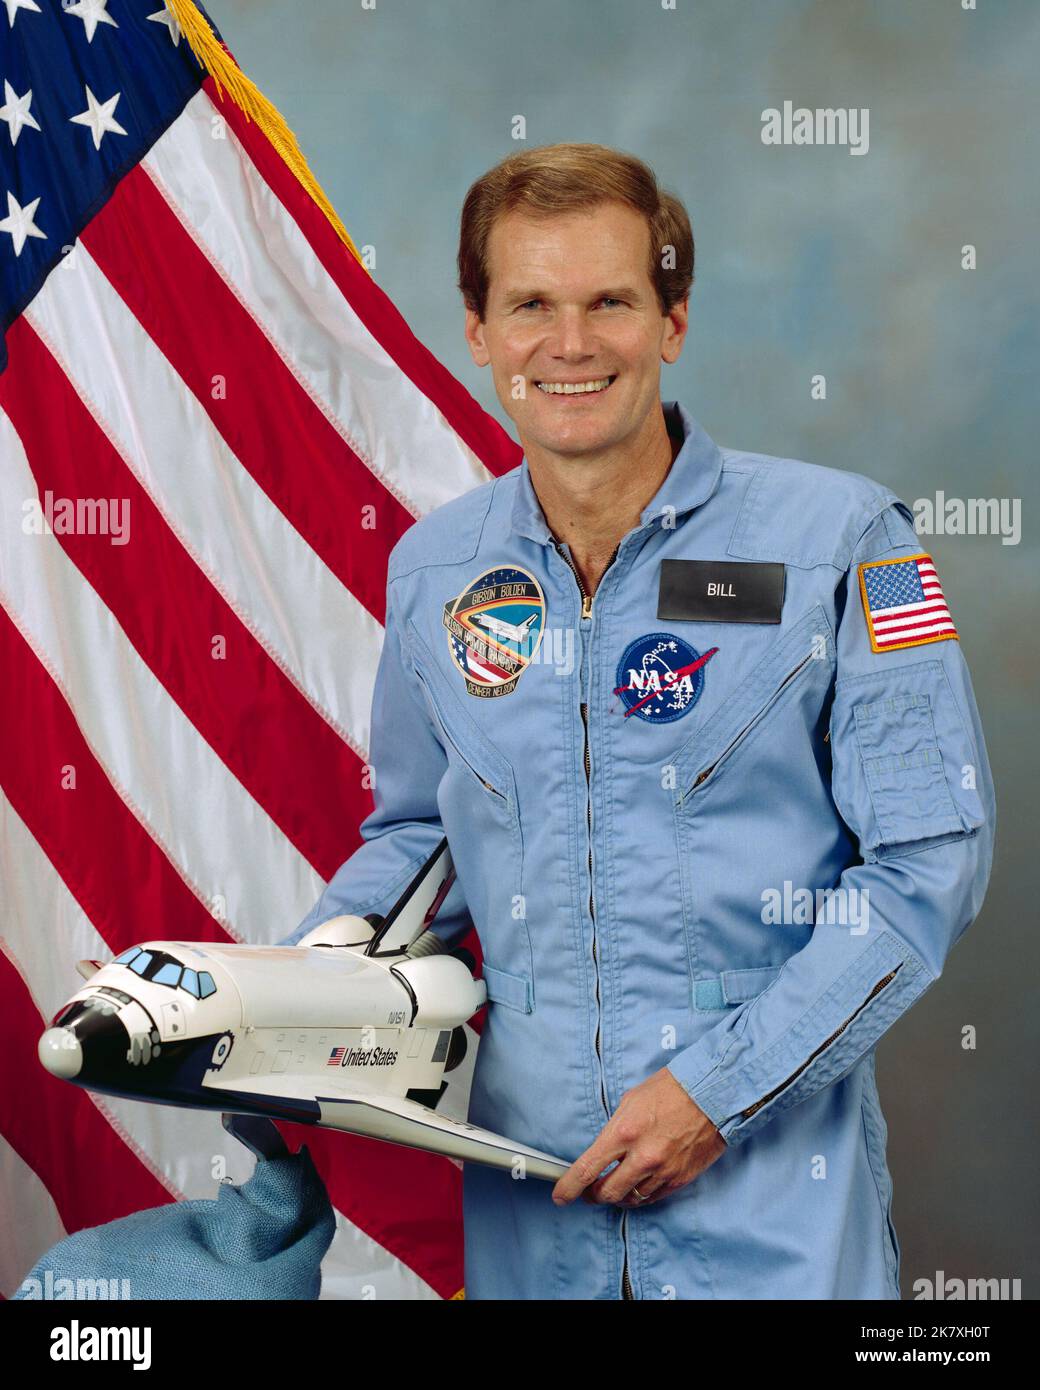 Official portrait of Congressman Bill Nelson, U.S. House of Representatives - Florida, STS 61-C payload specialist. Stock Photo